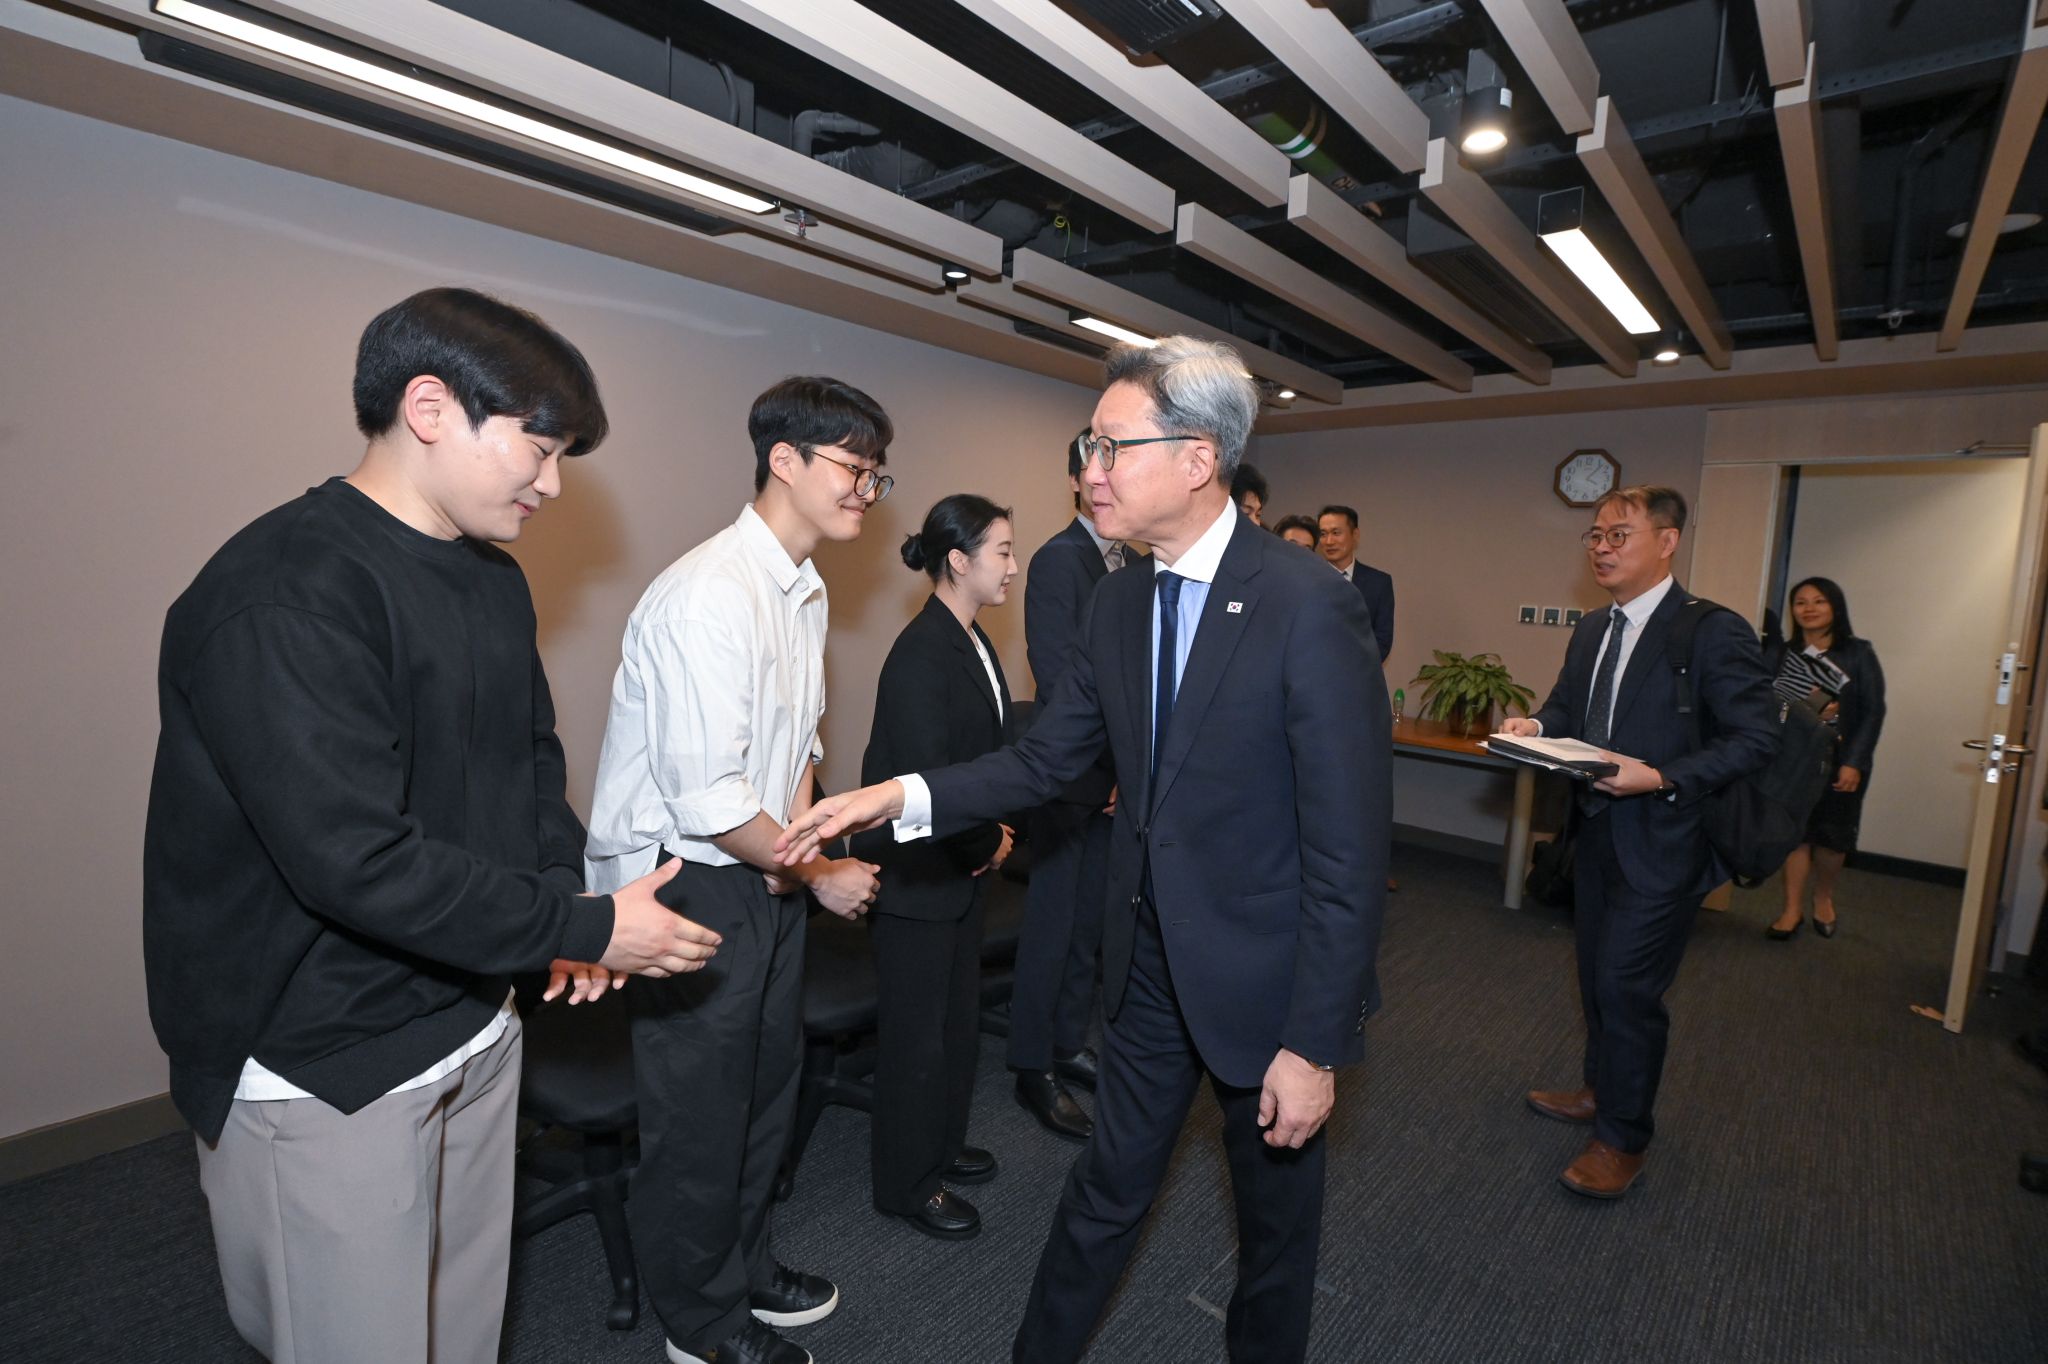 Dr. Chung met with HKUST Korean students and faculty members.